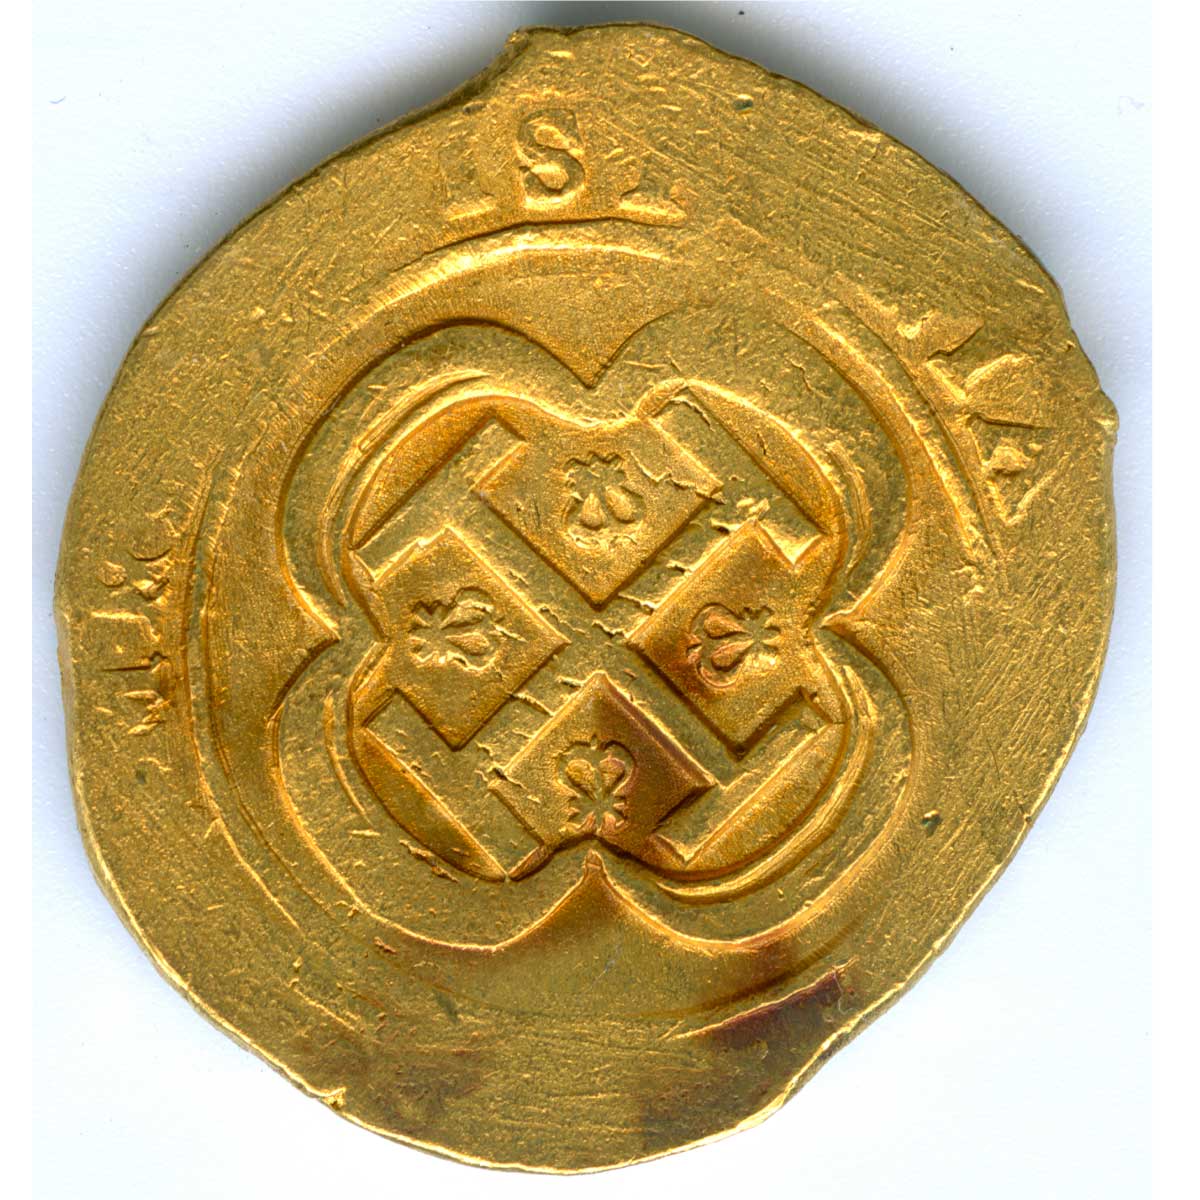 gold coin with letters and a double interlink in it